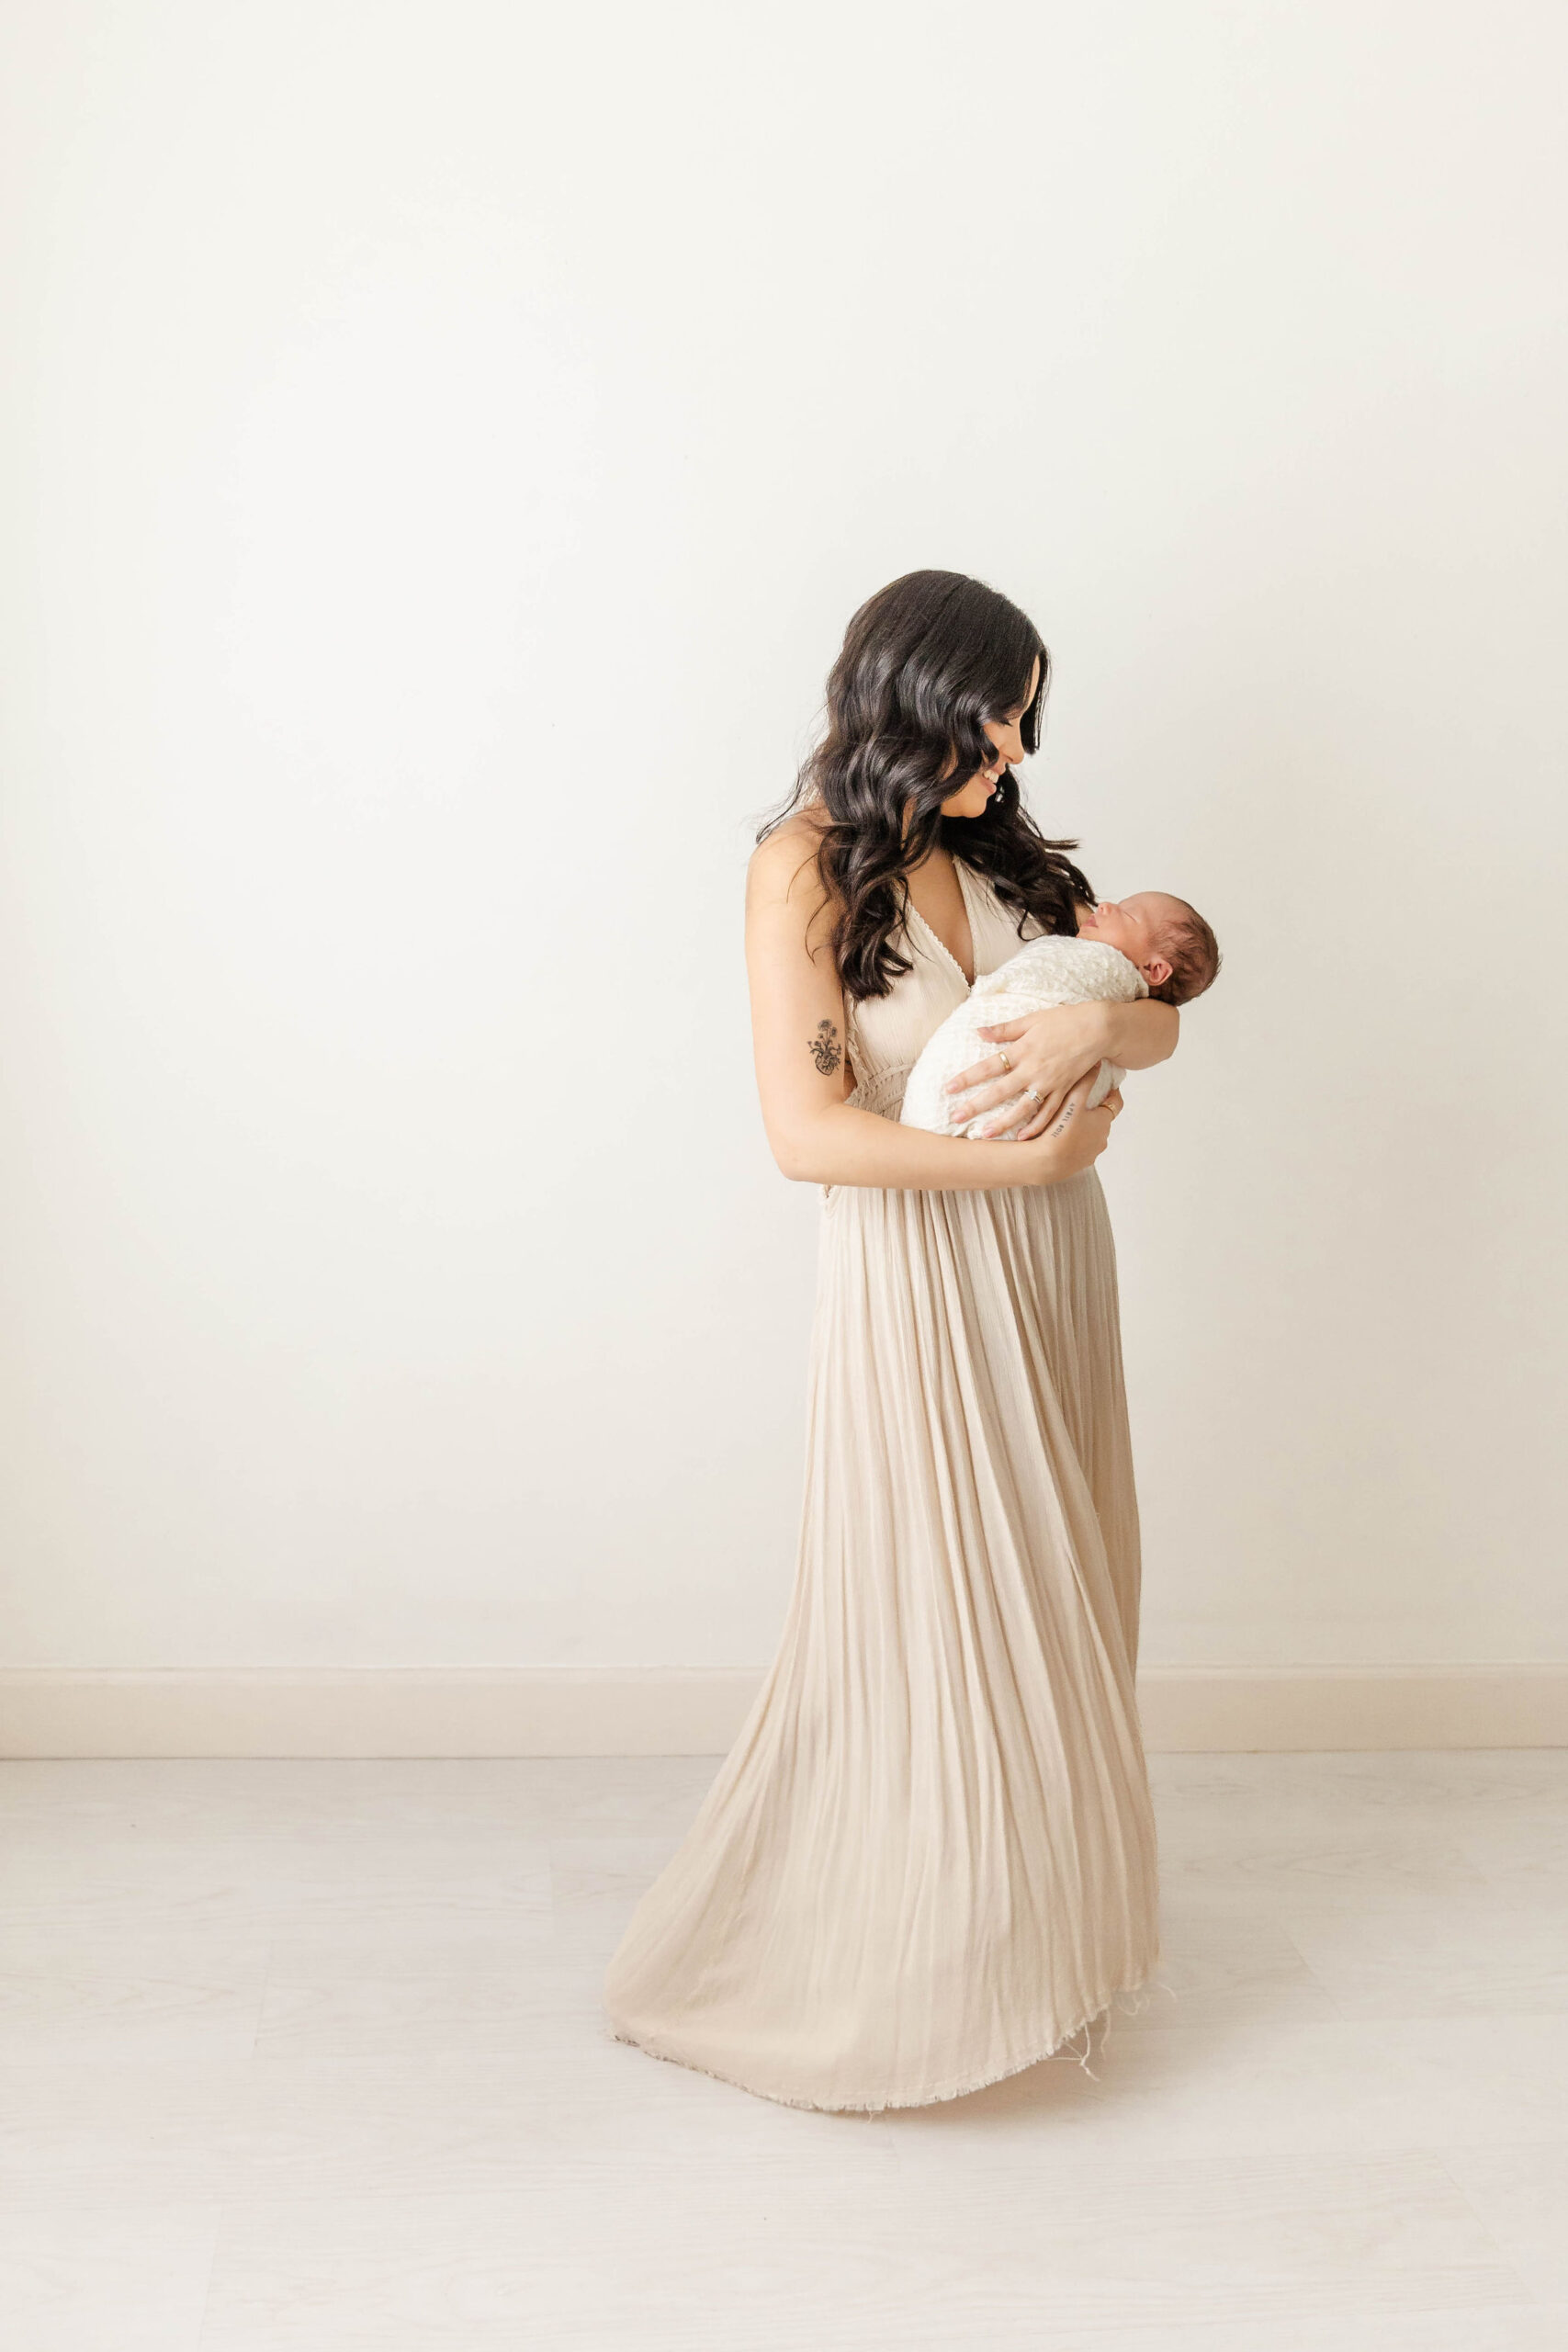 A smiling mother in a beige gown walks in a studio while holding her sleeping newborn baby